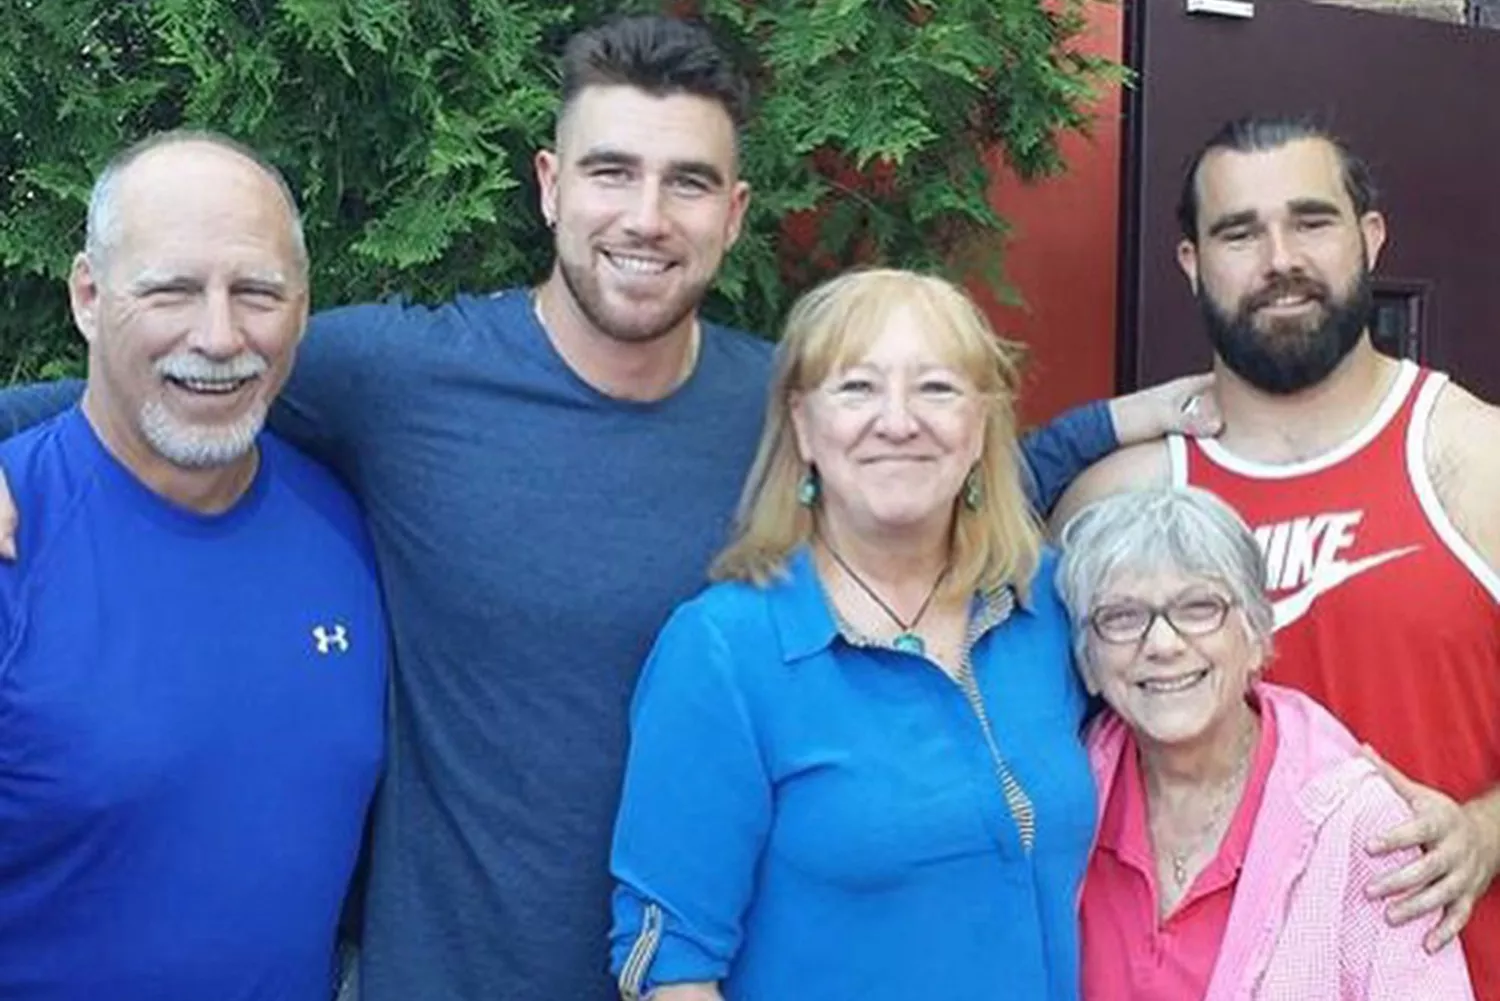 "From the very start, my heart has been singing love songs for her, my forever wife". And would you believe it? The Kelce brothers, Jason Kelce and Travis Kelce, are practically floating on clouds of joy as their mom and dad twirl back into each other's arms after a whimsical 25-year dance of separation.